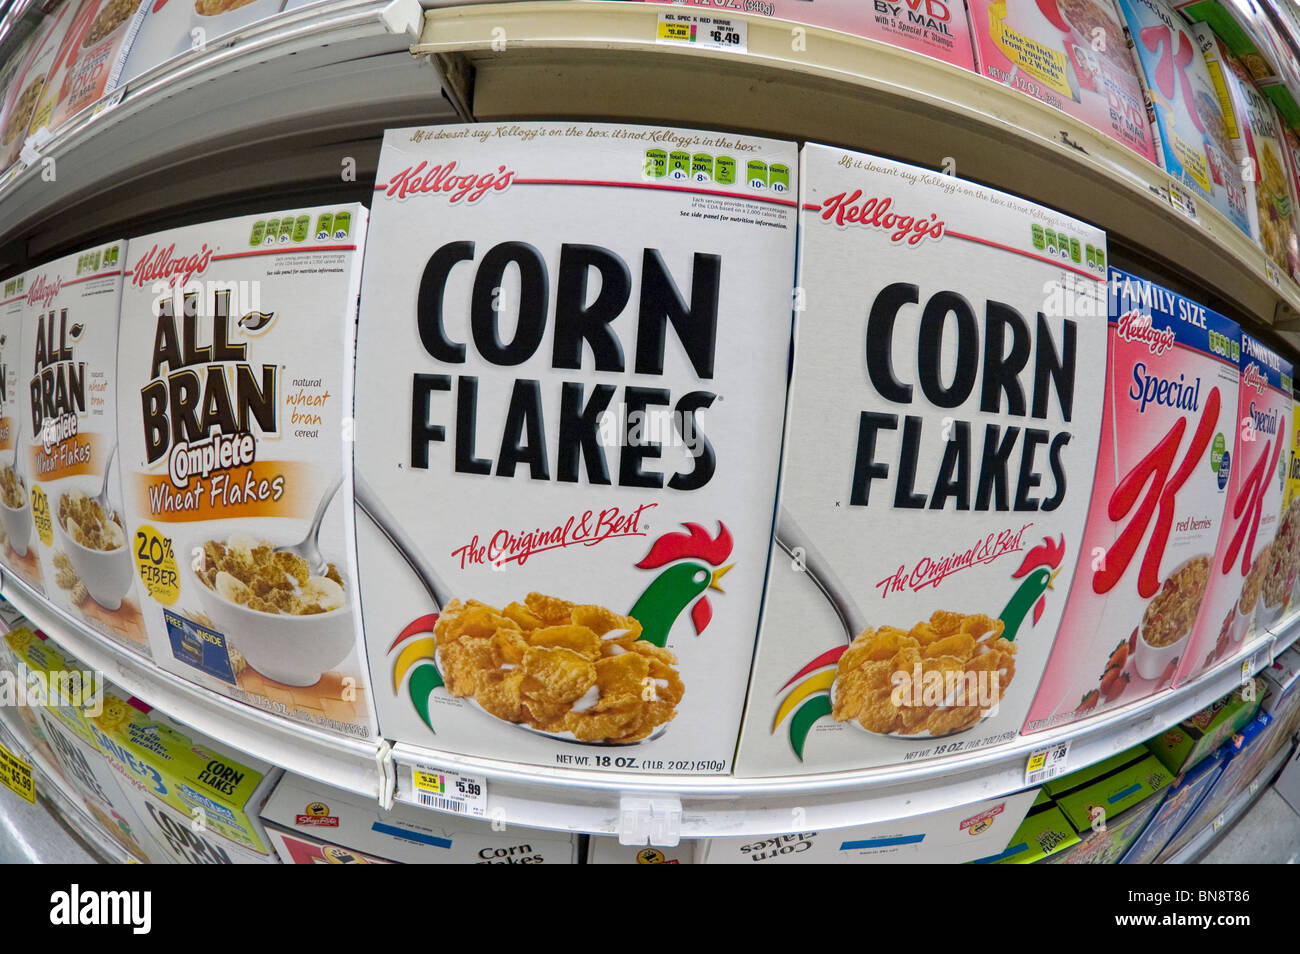 Boxes of Kellogg's Corn Flakes and other Kellogg's breakfast cereals are seen in a supermarket in New York Stock Photo